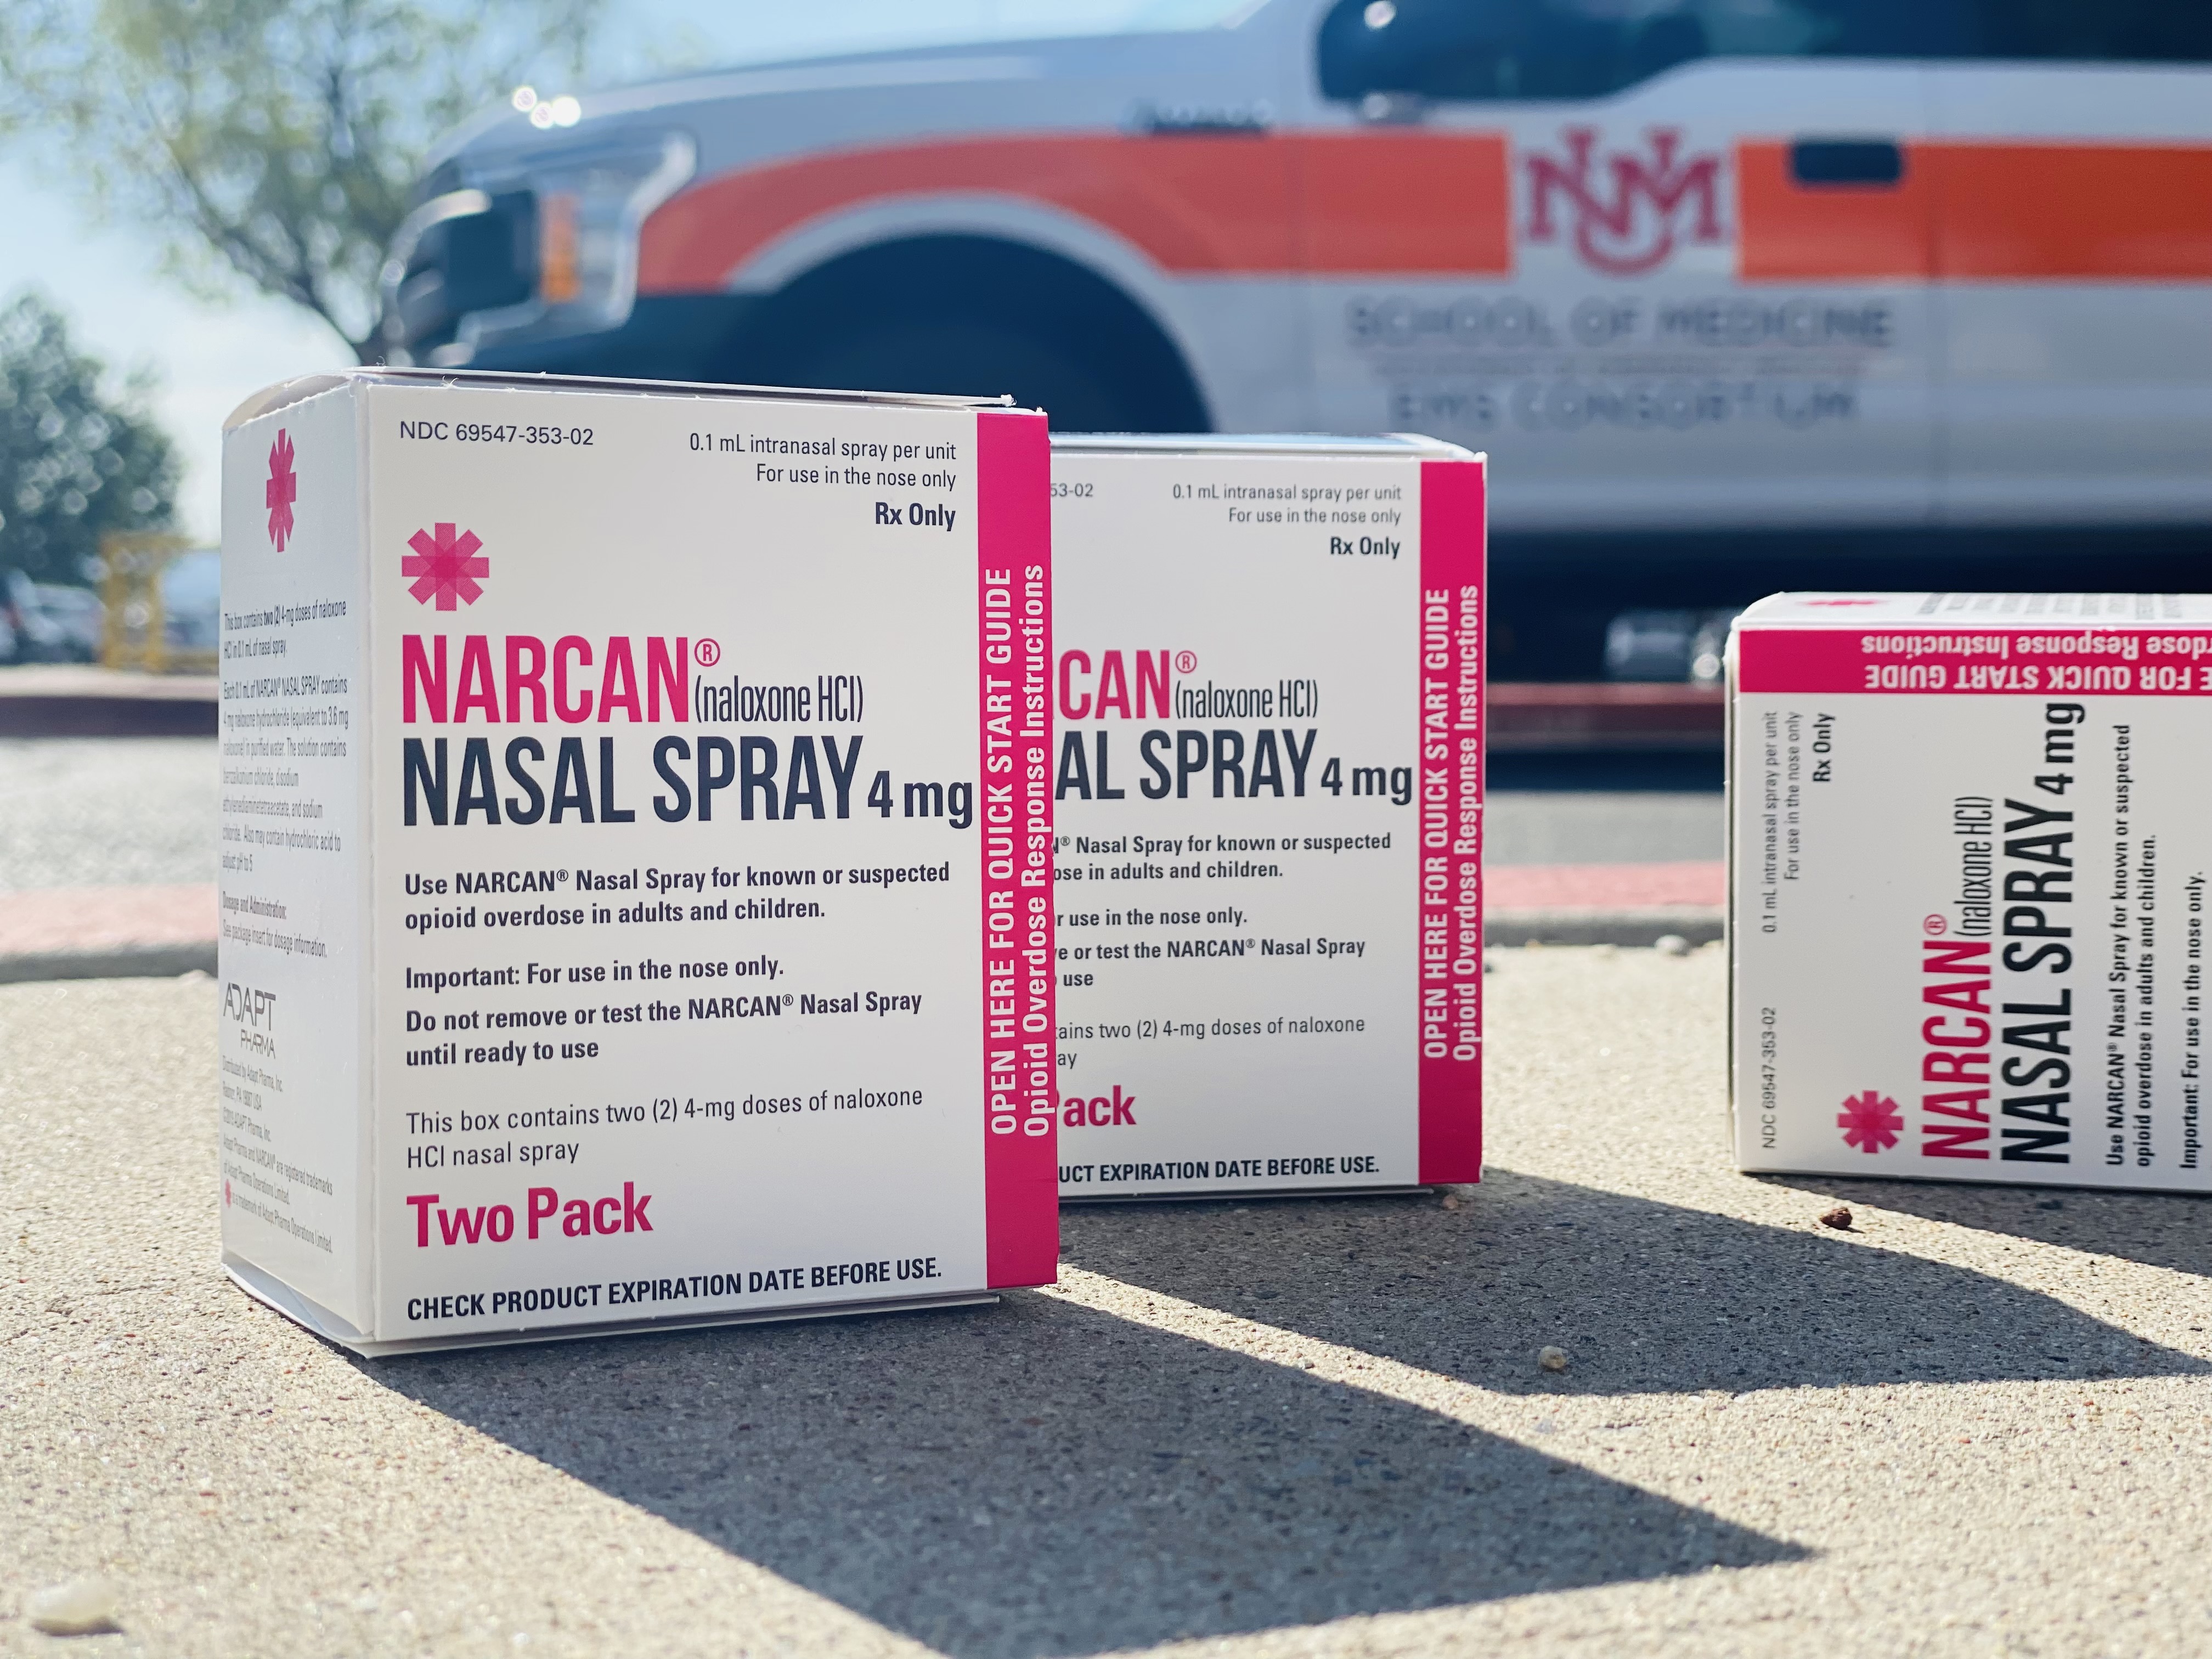 Boxes of the drug Narcan